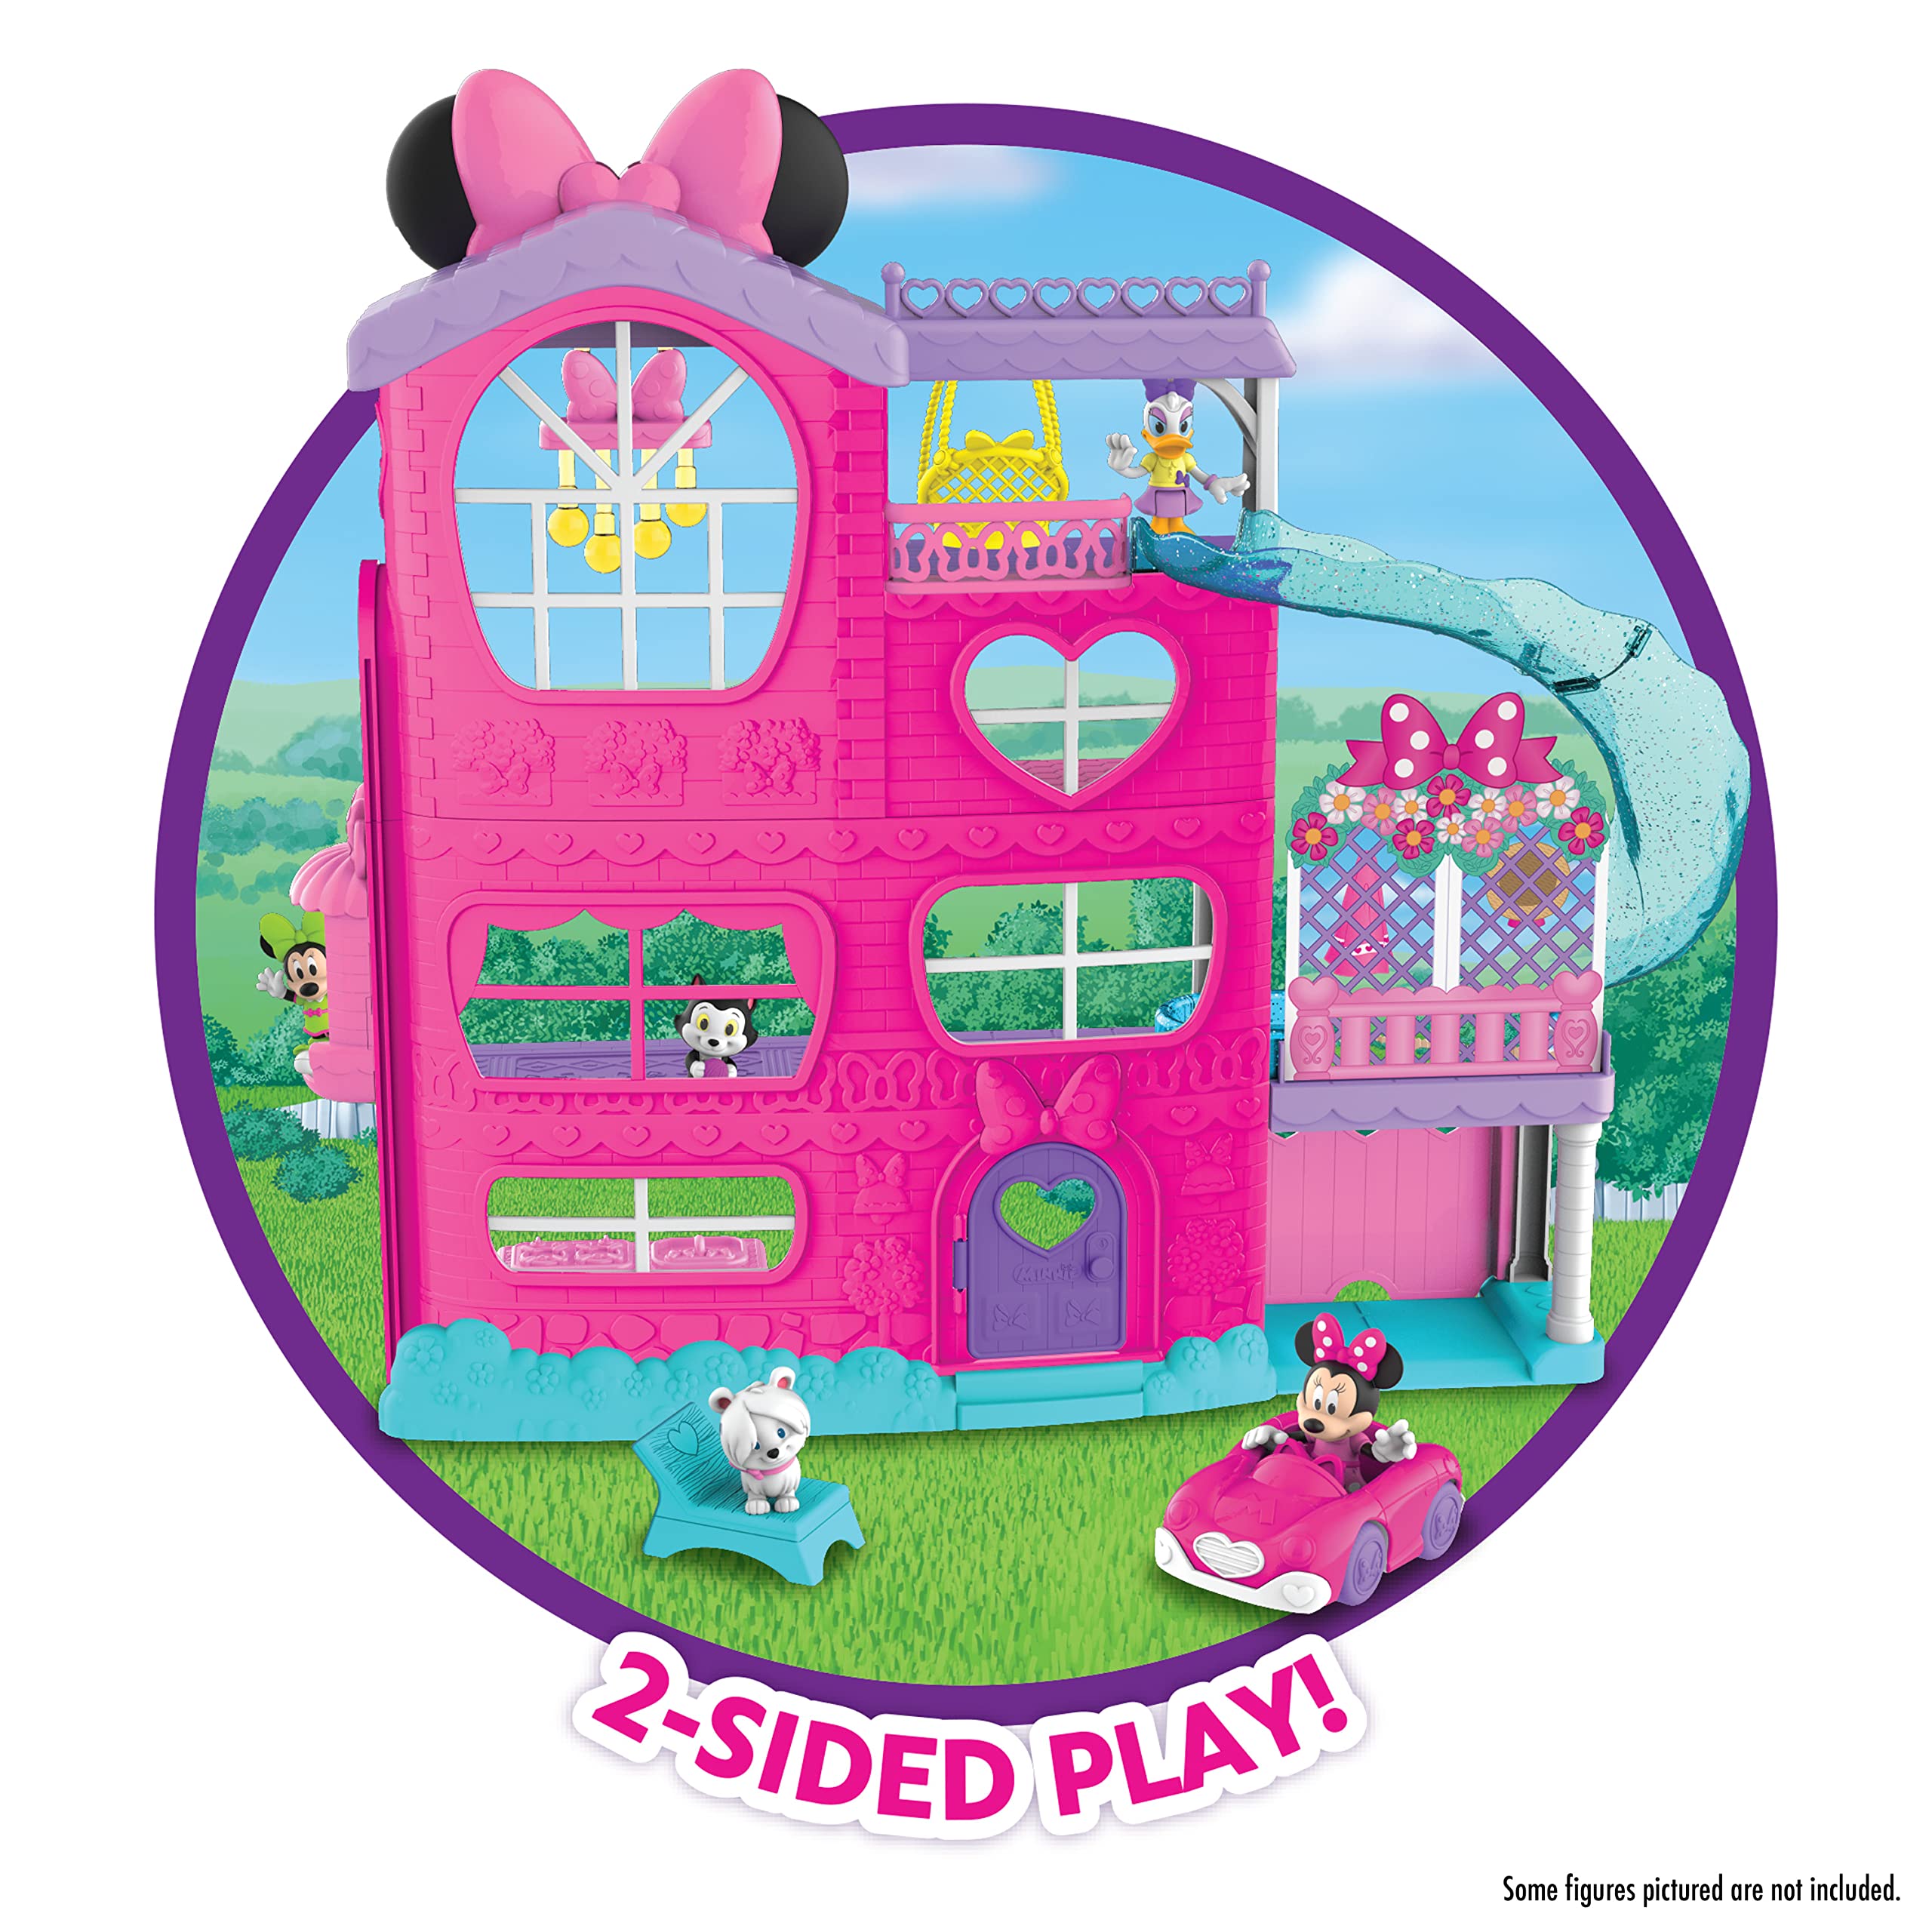 Disney Junior Minnie Mouse Ultimate Mansion 22-inch Playset with Bonus Figures, 23-piece Toy Figures and Playset, Kids Toys for Ages 3 Up, Amazon Exclusive